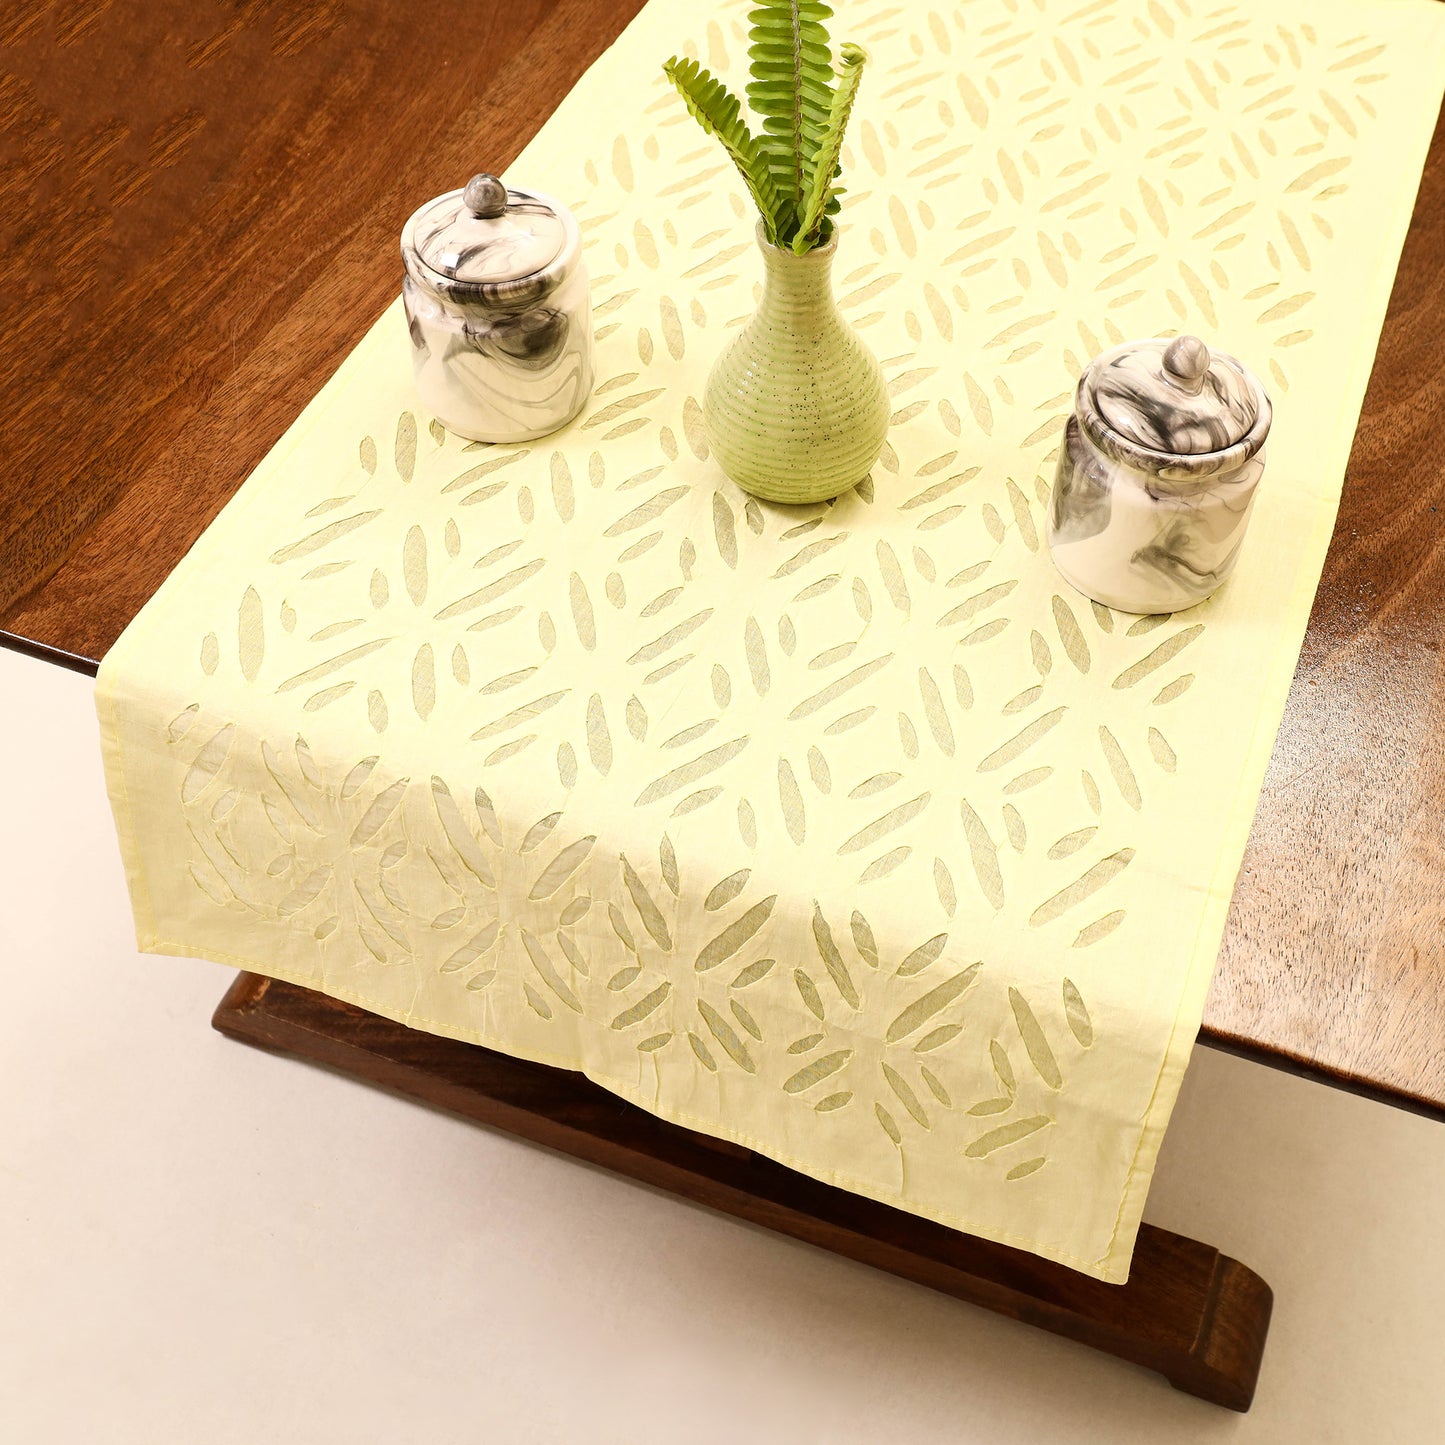 Applique Cut work Cotton Table Runner (35 x 17 in)